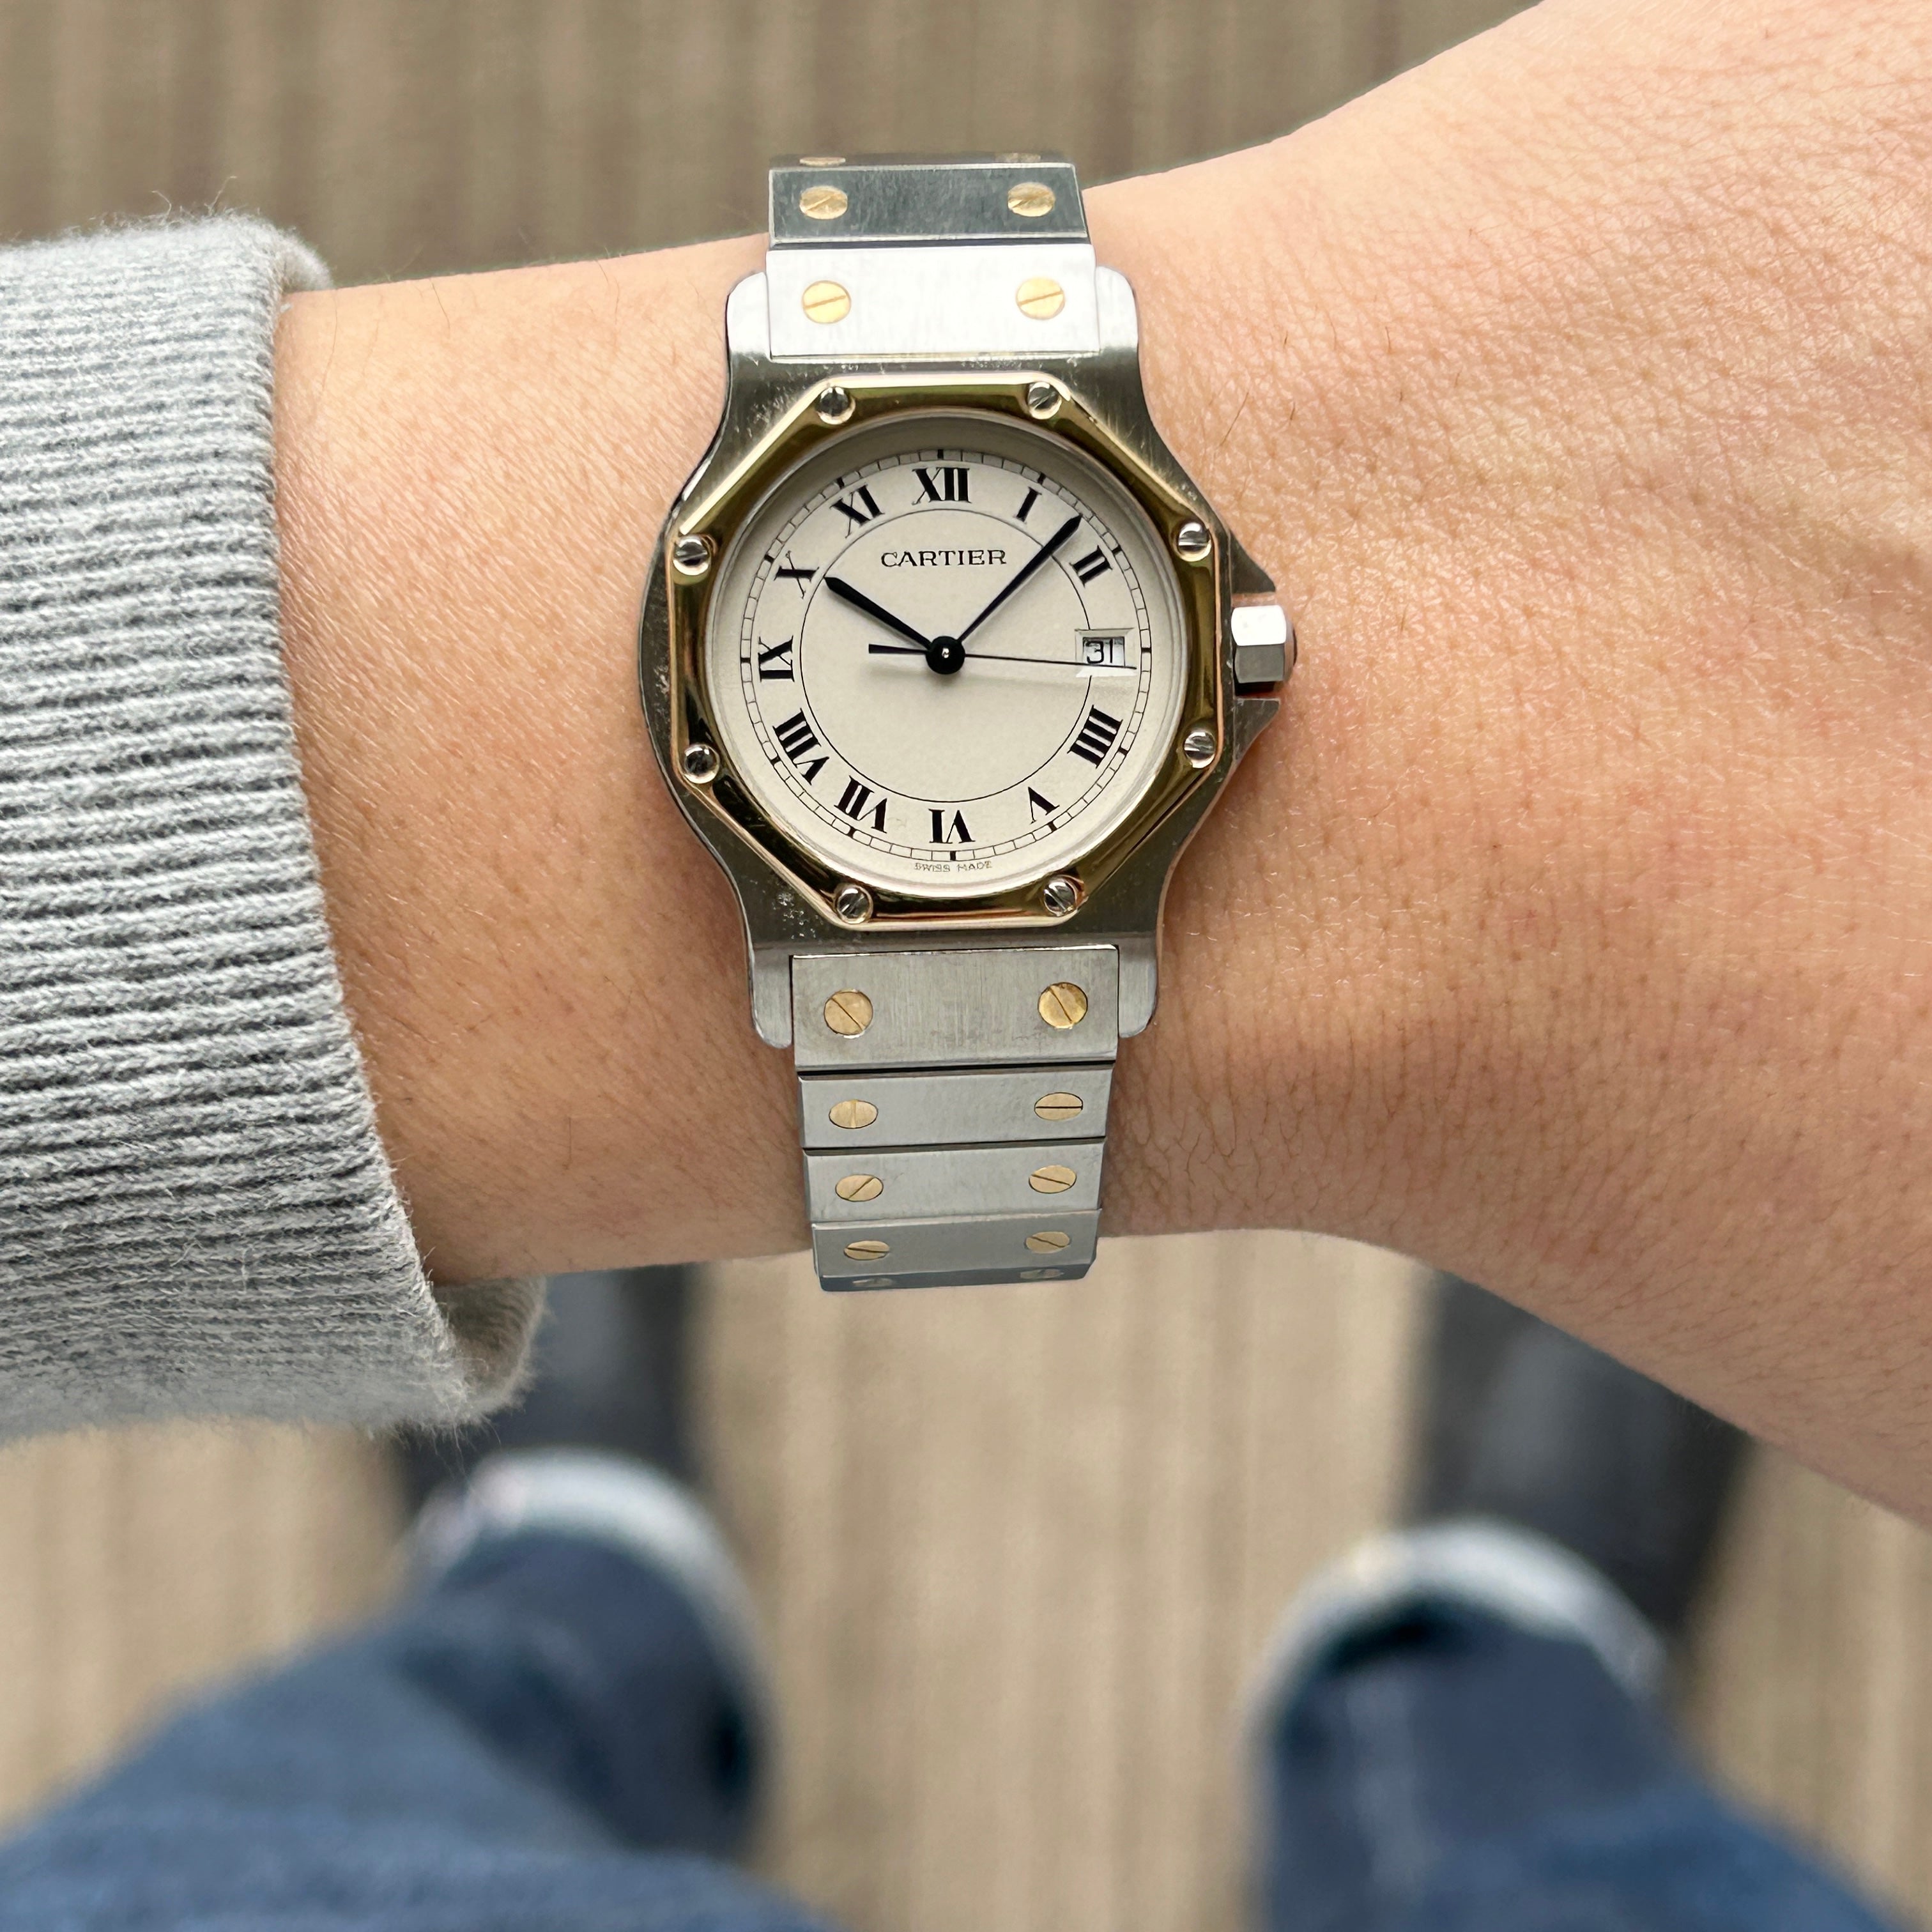 Cartier】サントスオクタゴンLMコンビQuartz – REGALO vintage watch